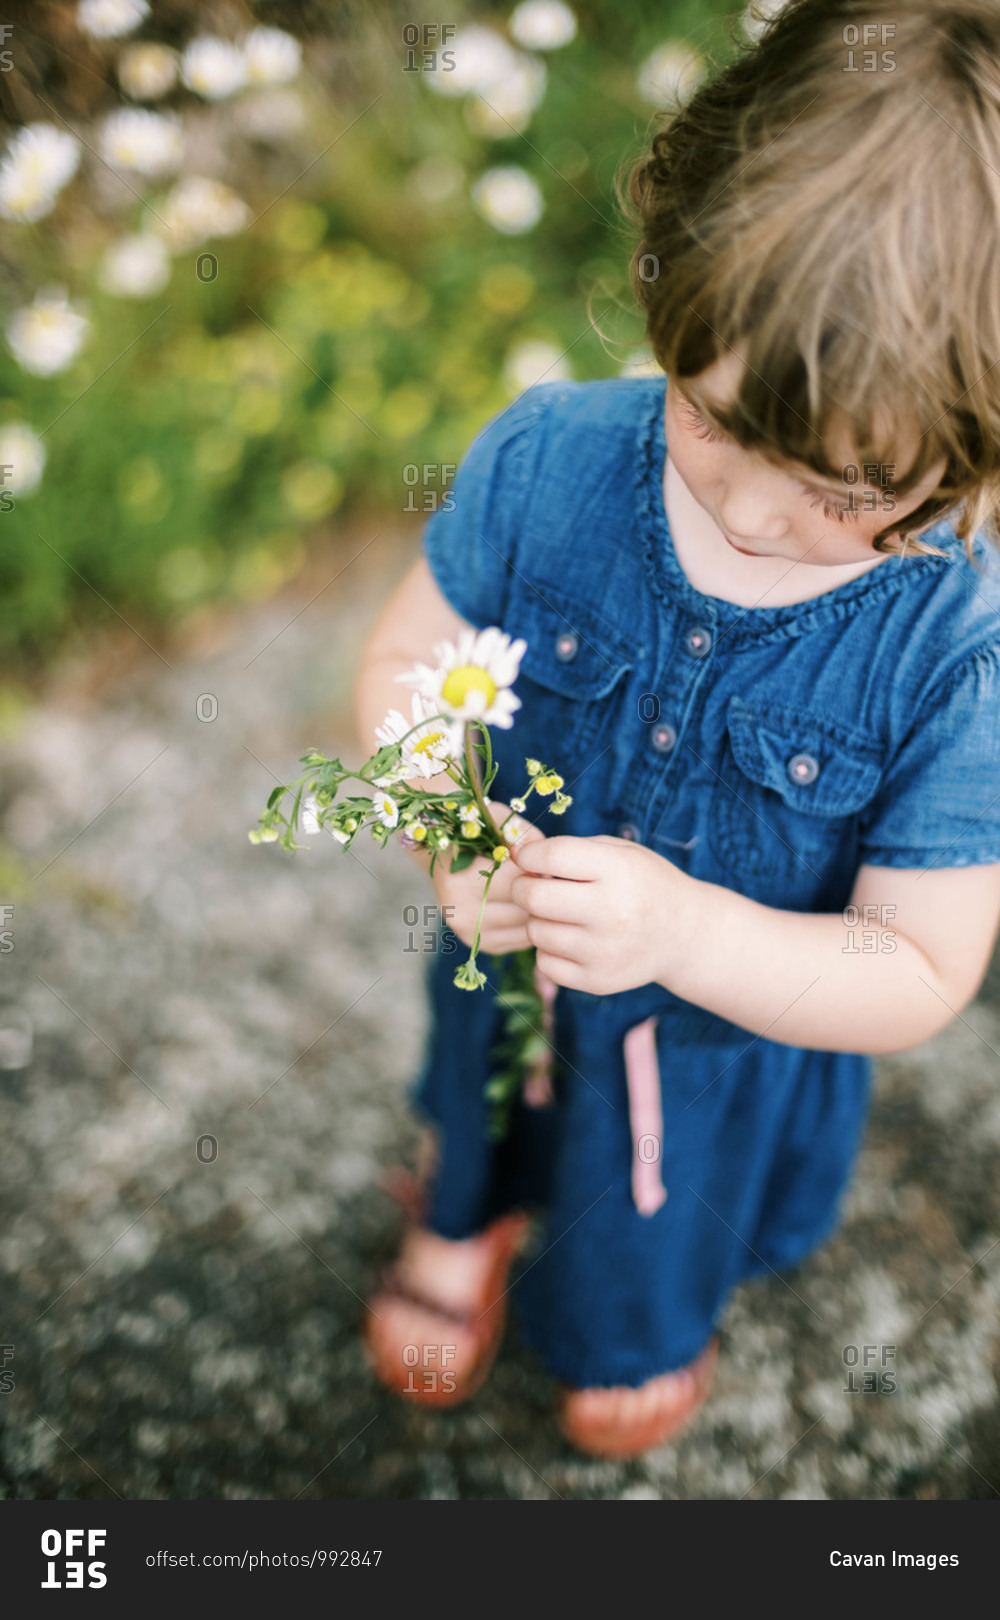 A little girl studying her picked wild flowers